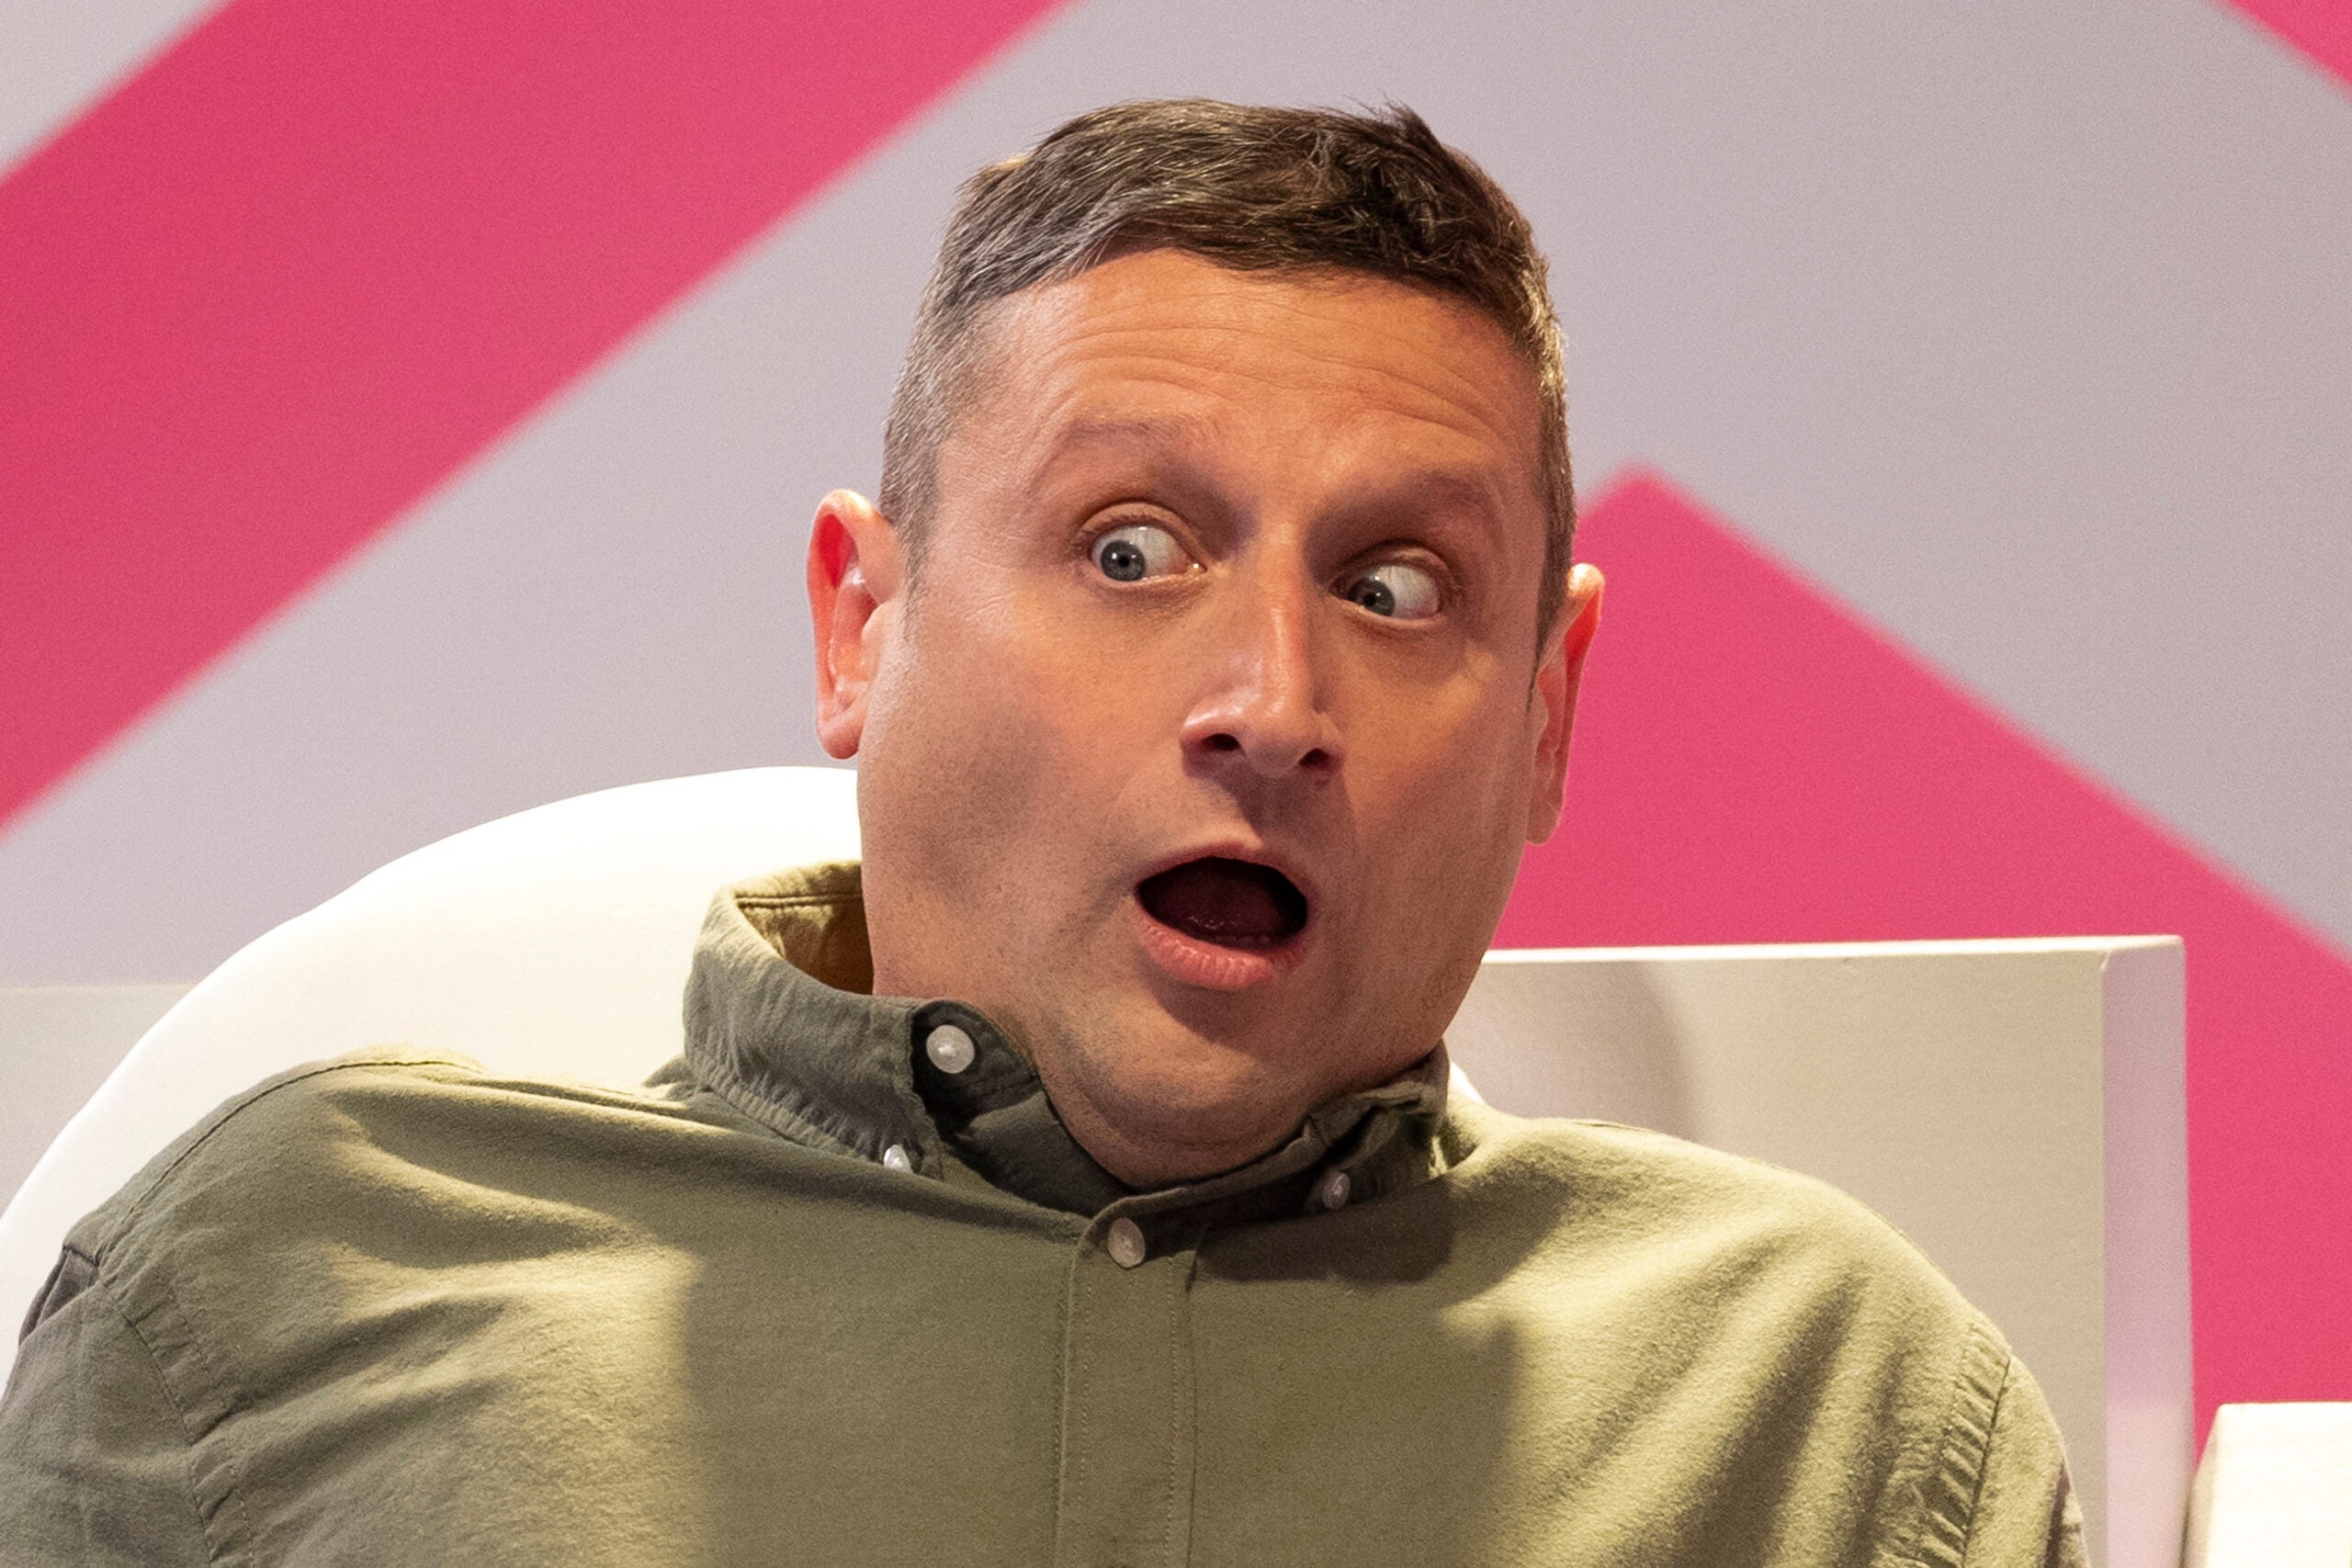 Tim Robinson stars in "I Think You Should Leave with Tim Robinson" on Netflix.